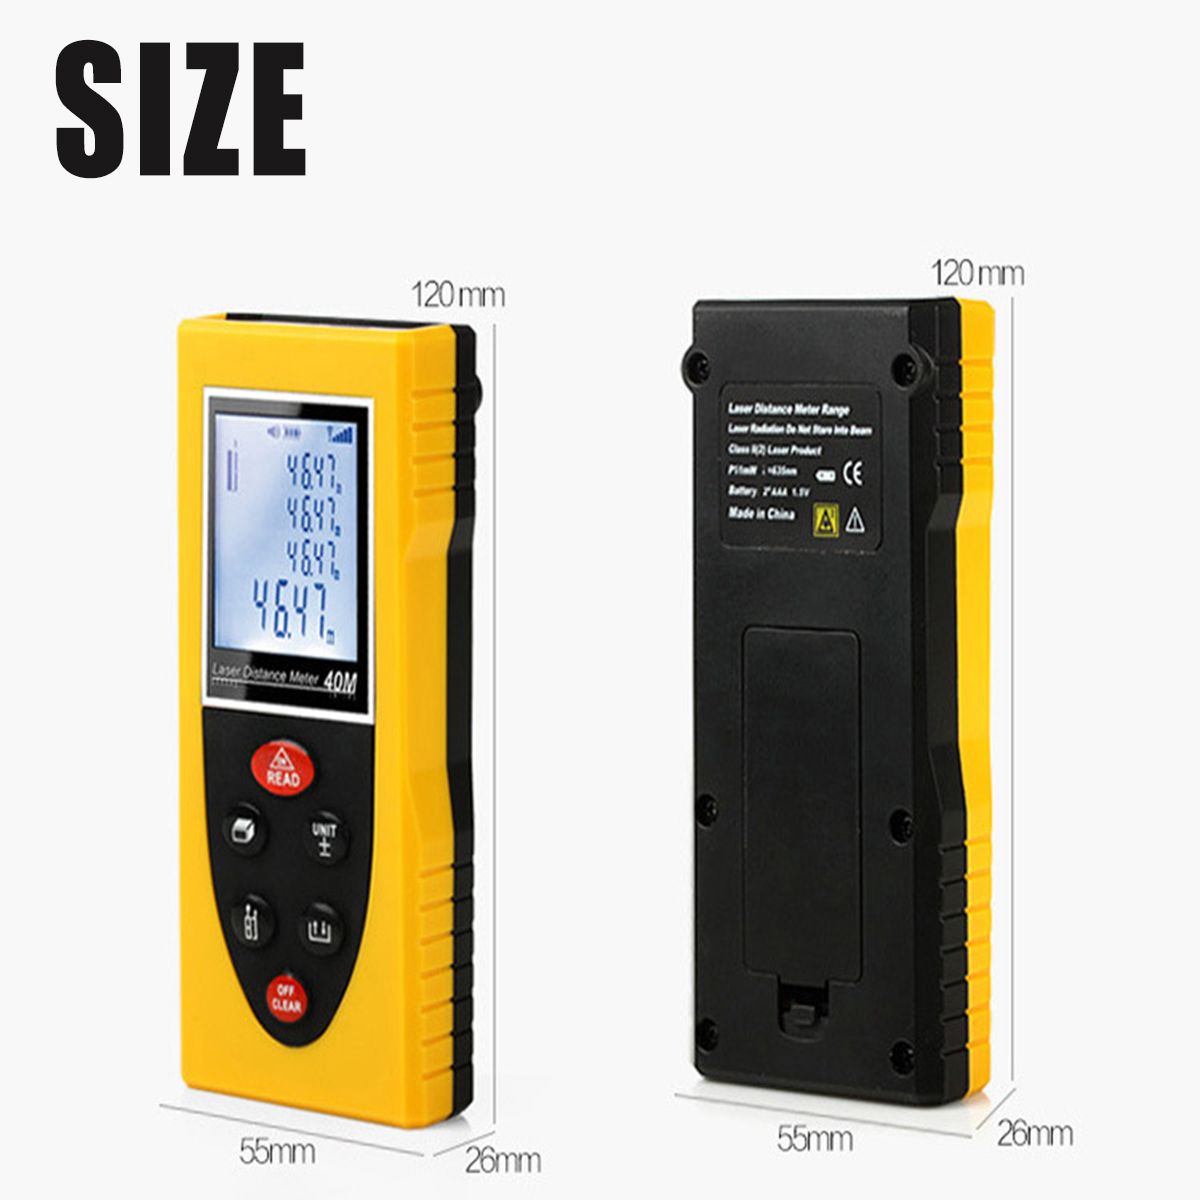 40M-Rangefinder-Infrared-Measuring-Instrument-Small-High-precision-Electronic-Ruler-Laser-Distance-M-1642107